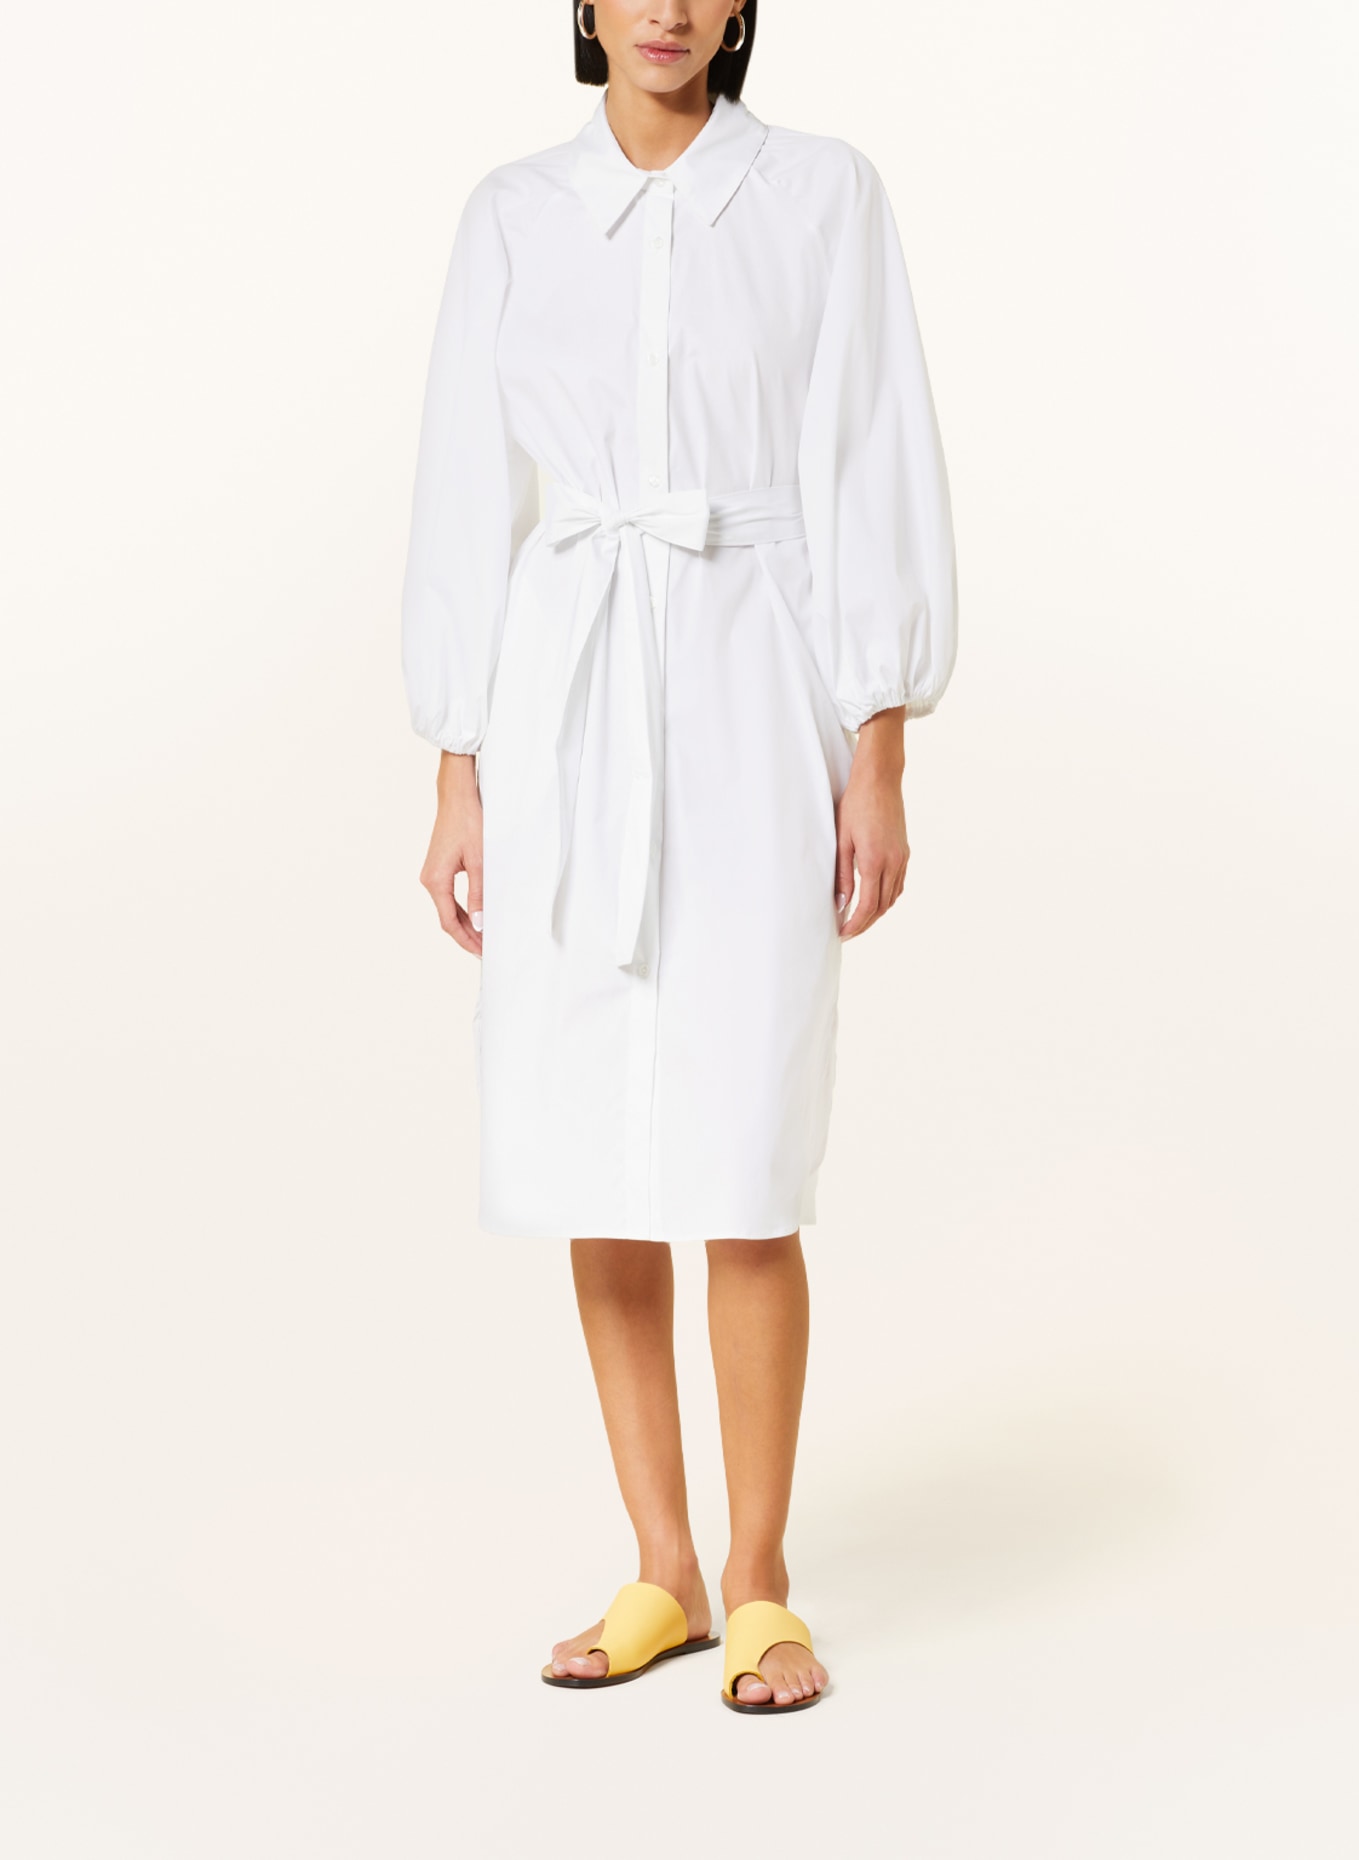 MRS & HUGS Shirt dress with 3/4 sleeves, Color: WHITE (Image 2)